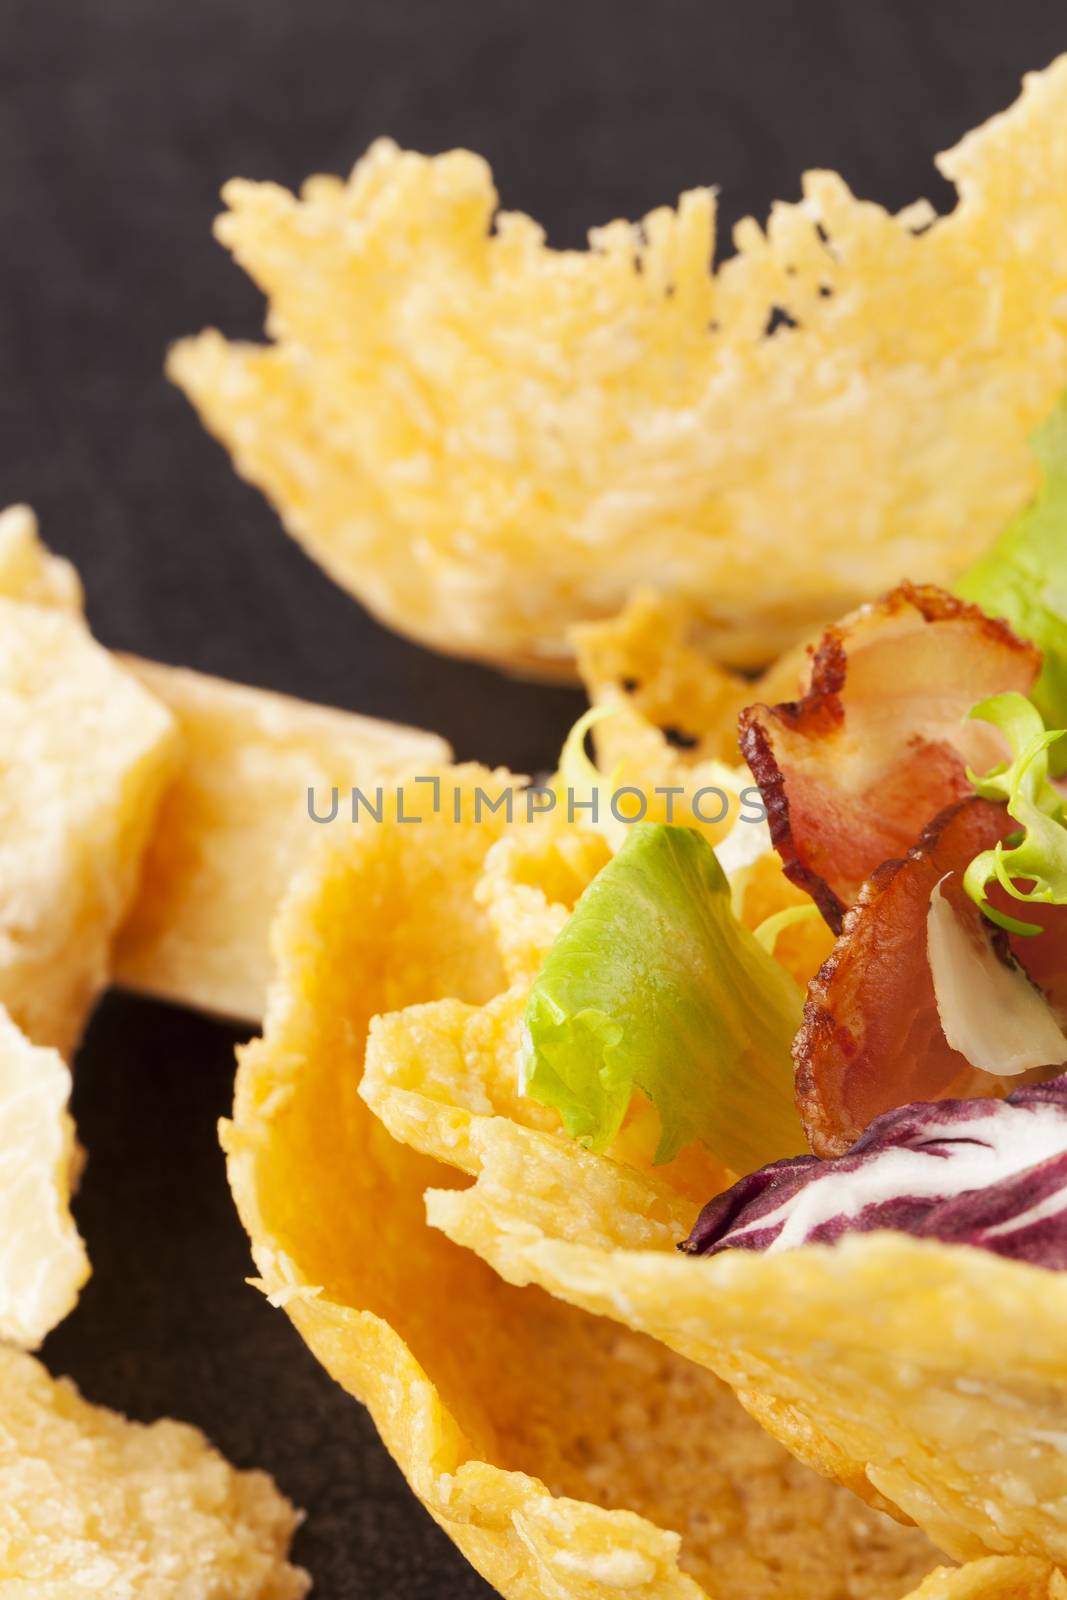 Parmigiano cheese basket filled with colorful vegetable and bacon. Luxurious cheese eating.